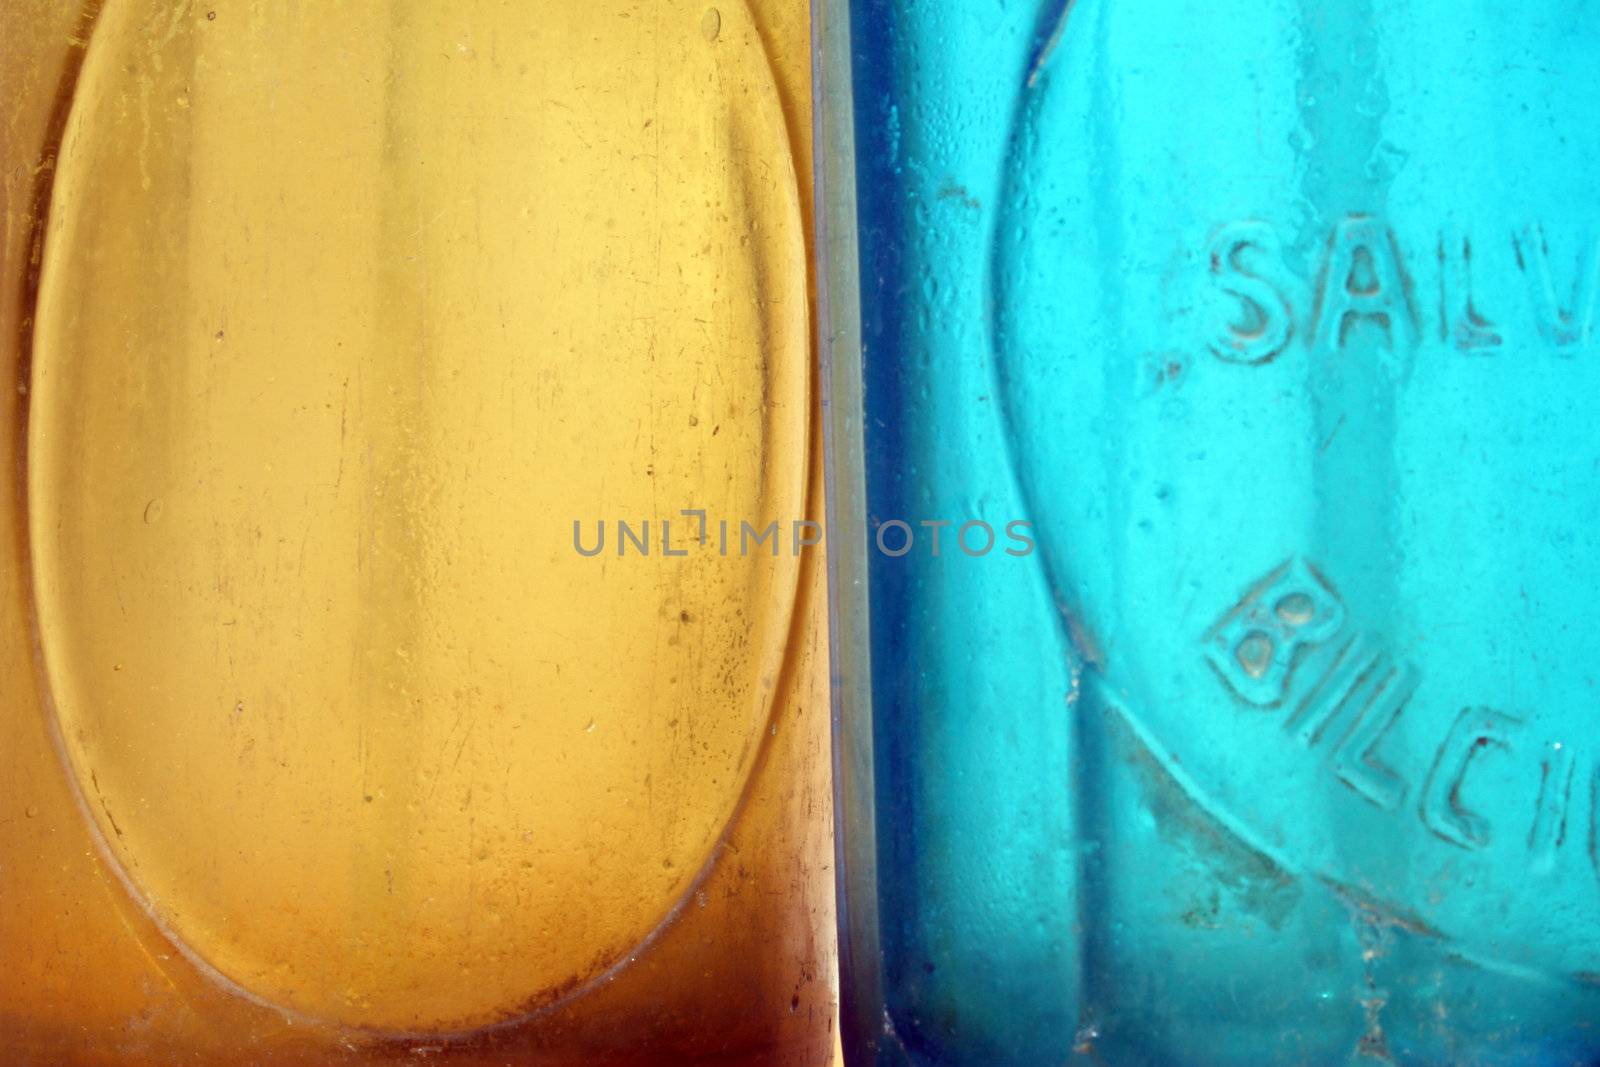 Close-up of yellow and blue seltzer bottles